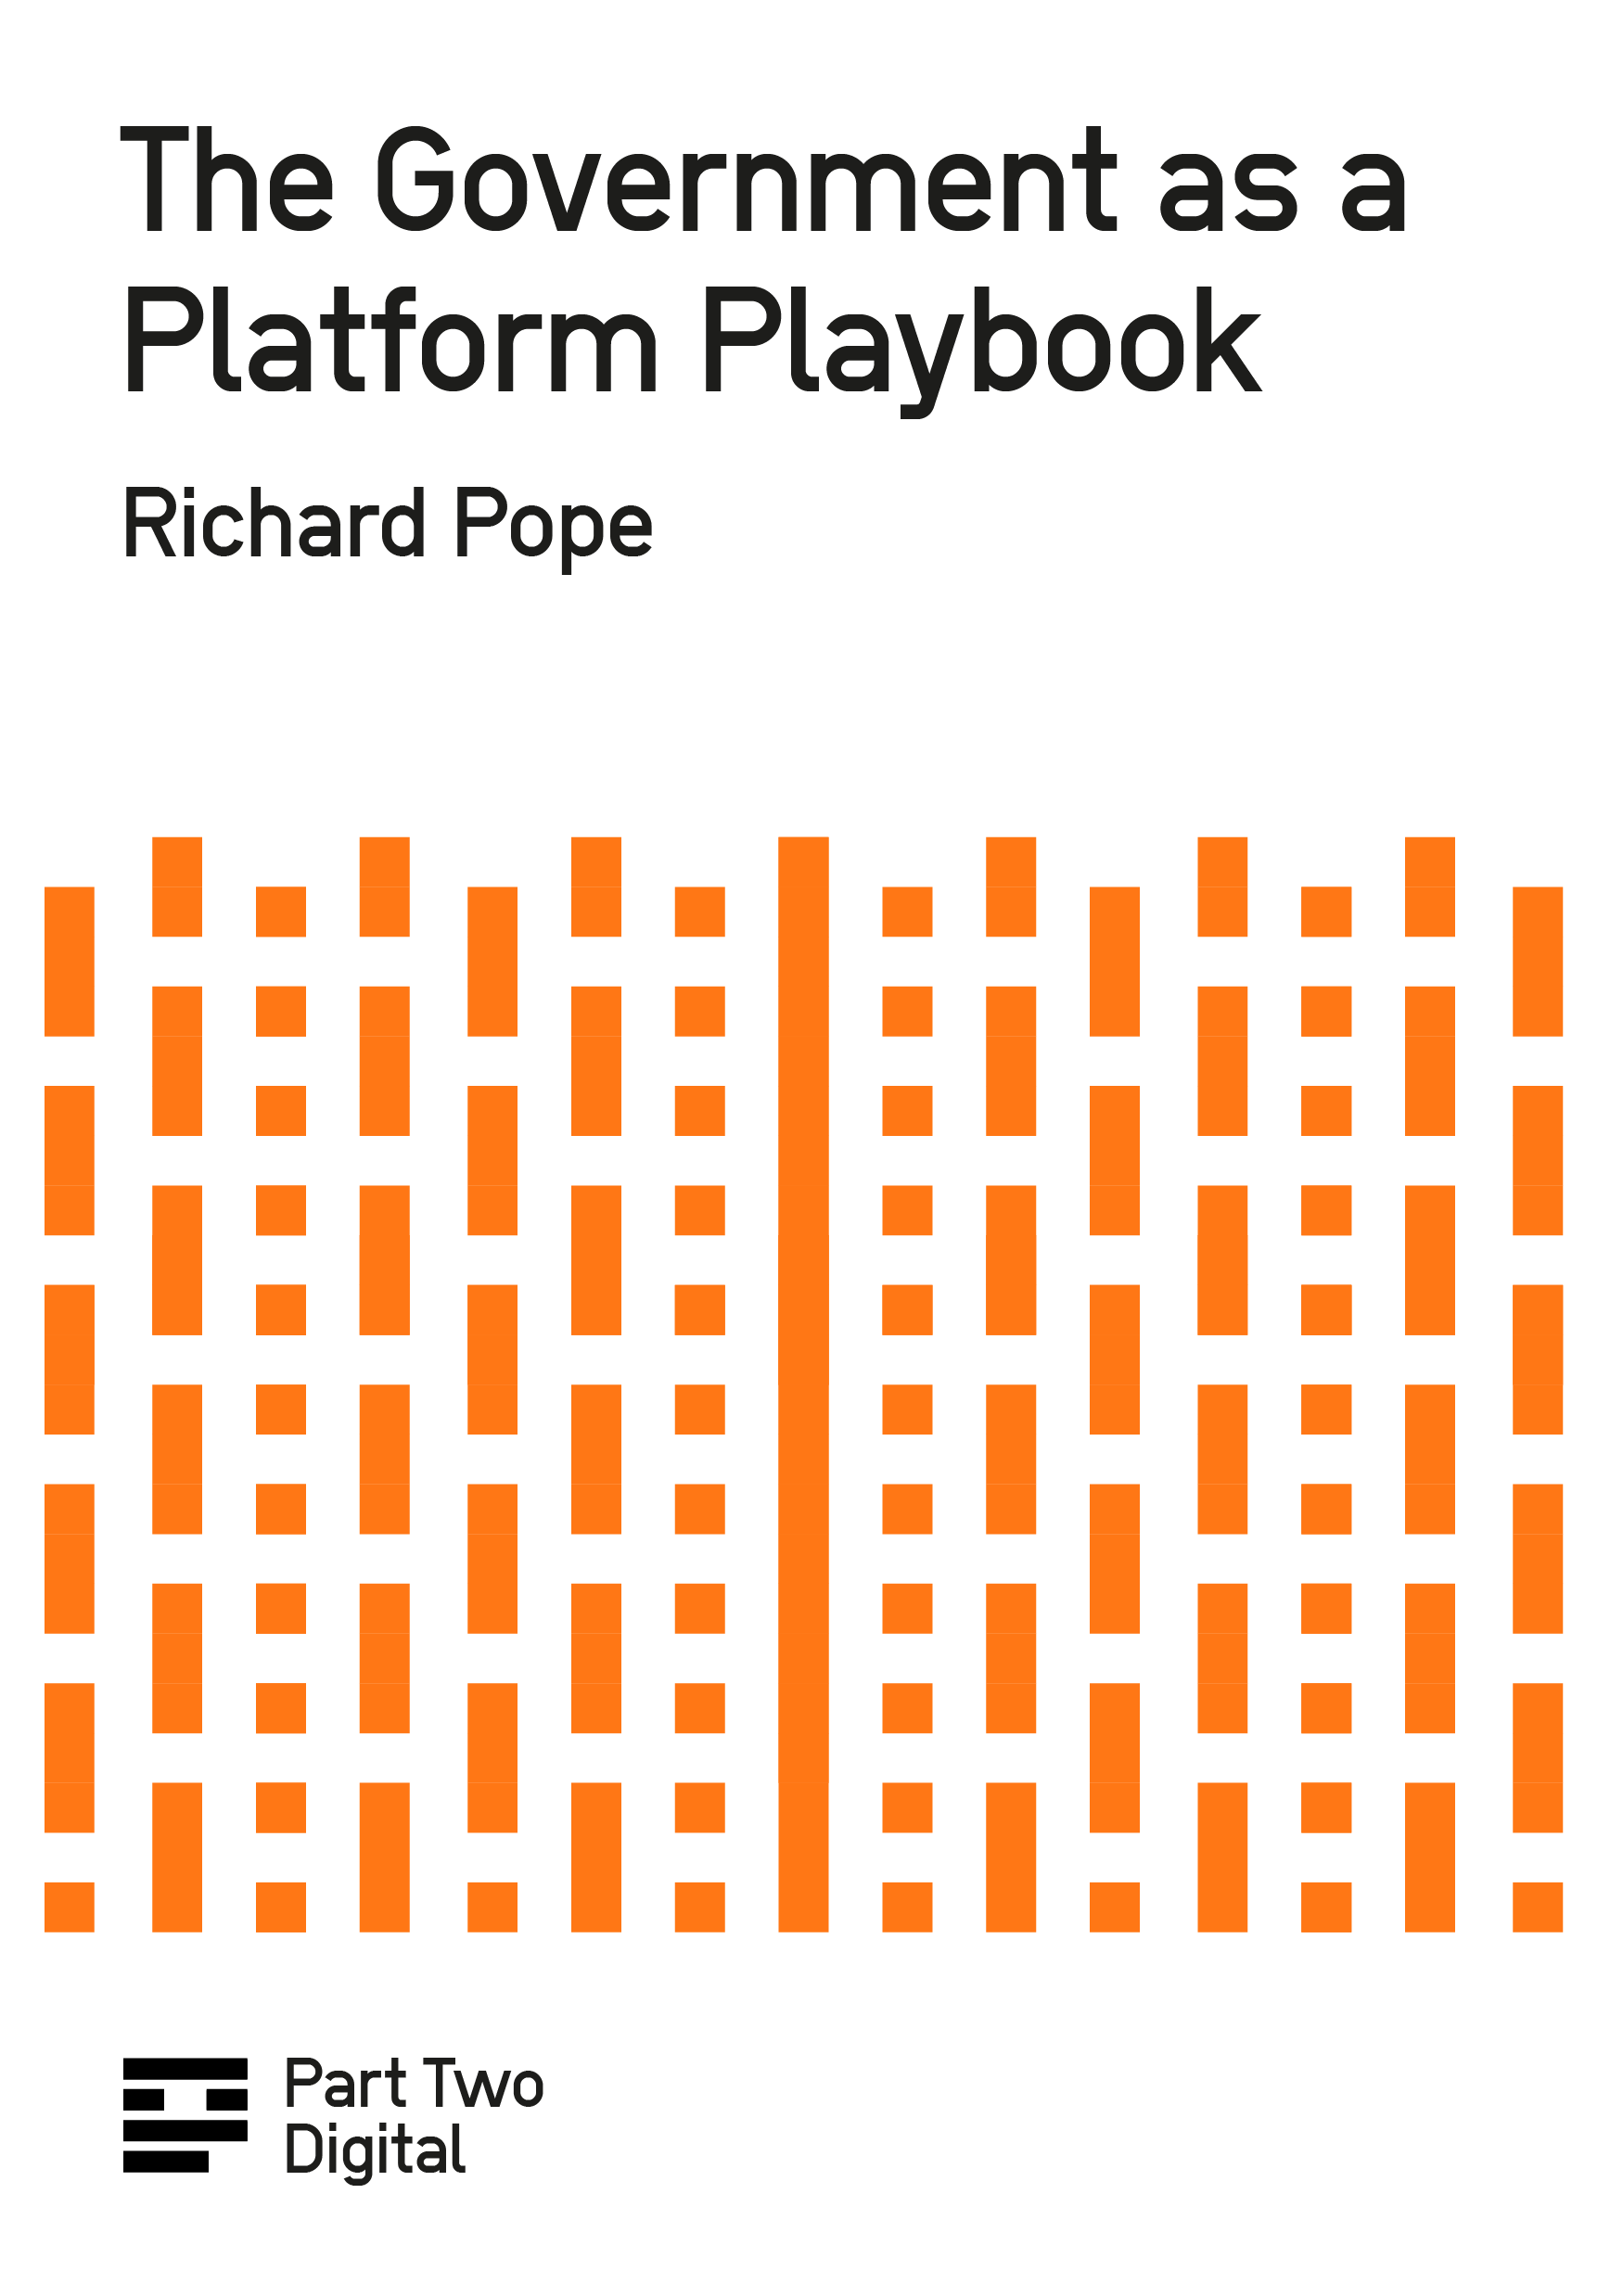 Cover of publication with orange pixel pattern of vertical stripes of different lengths